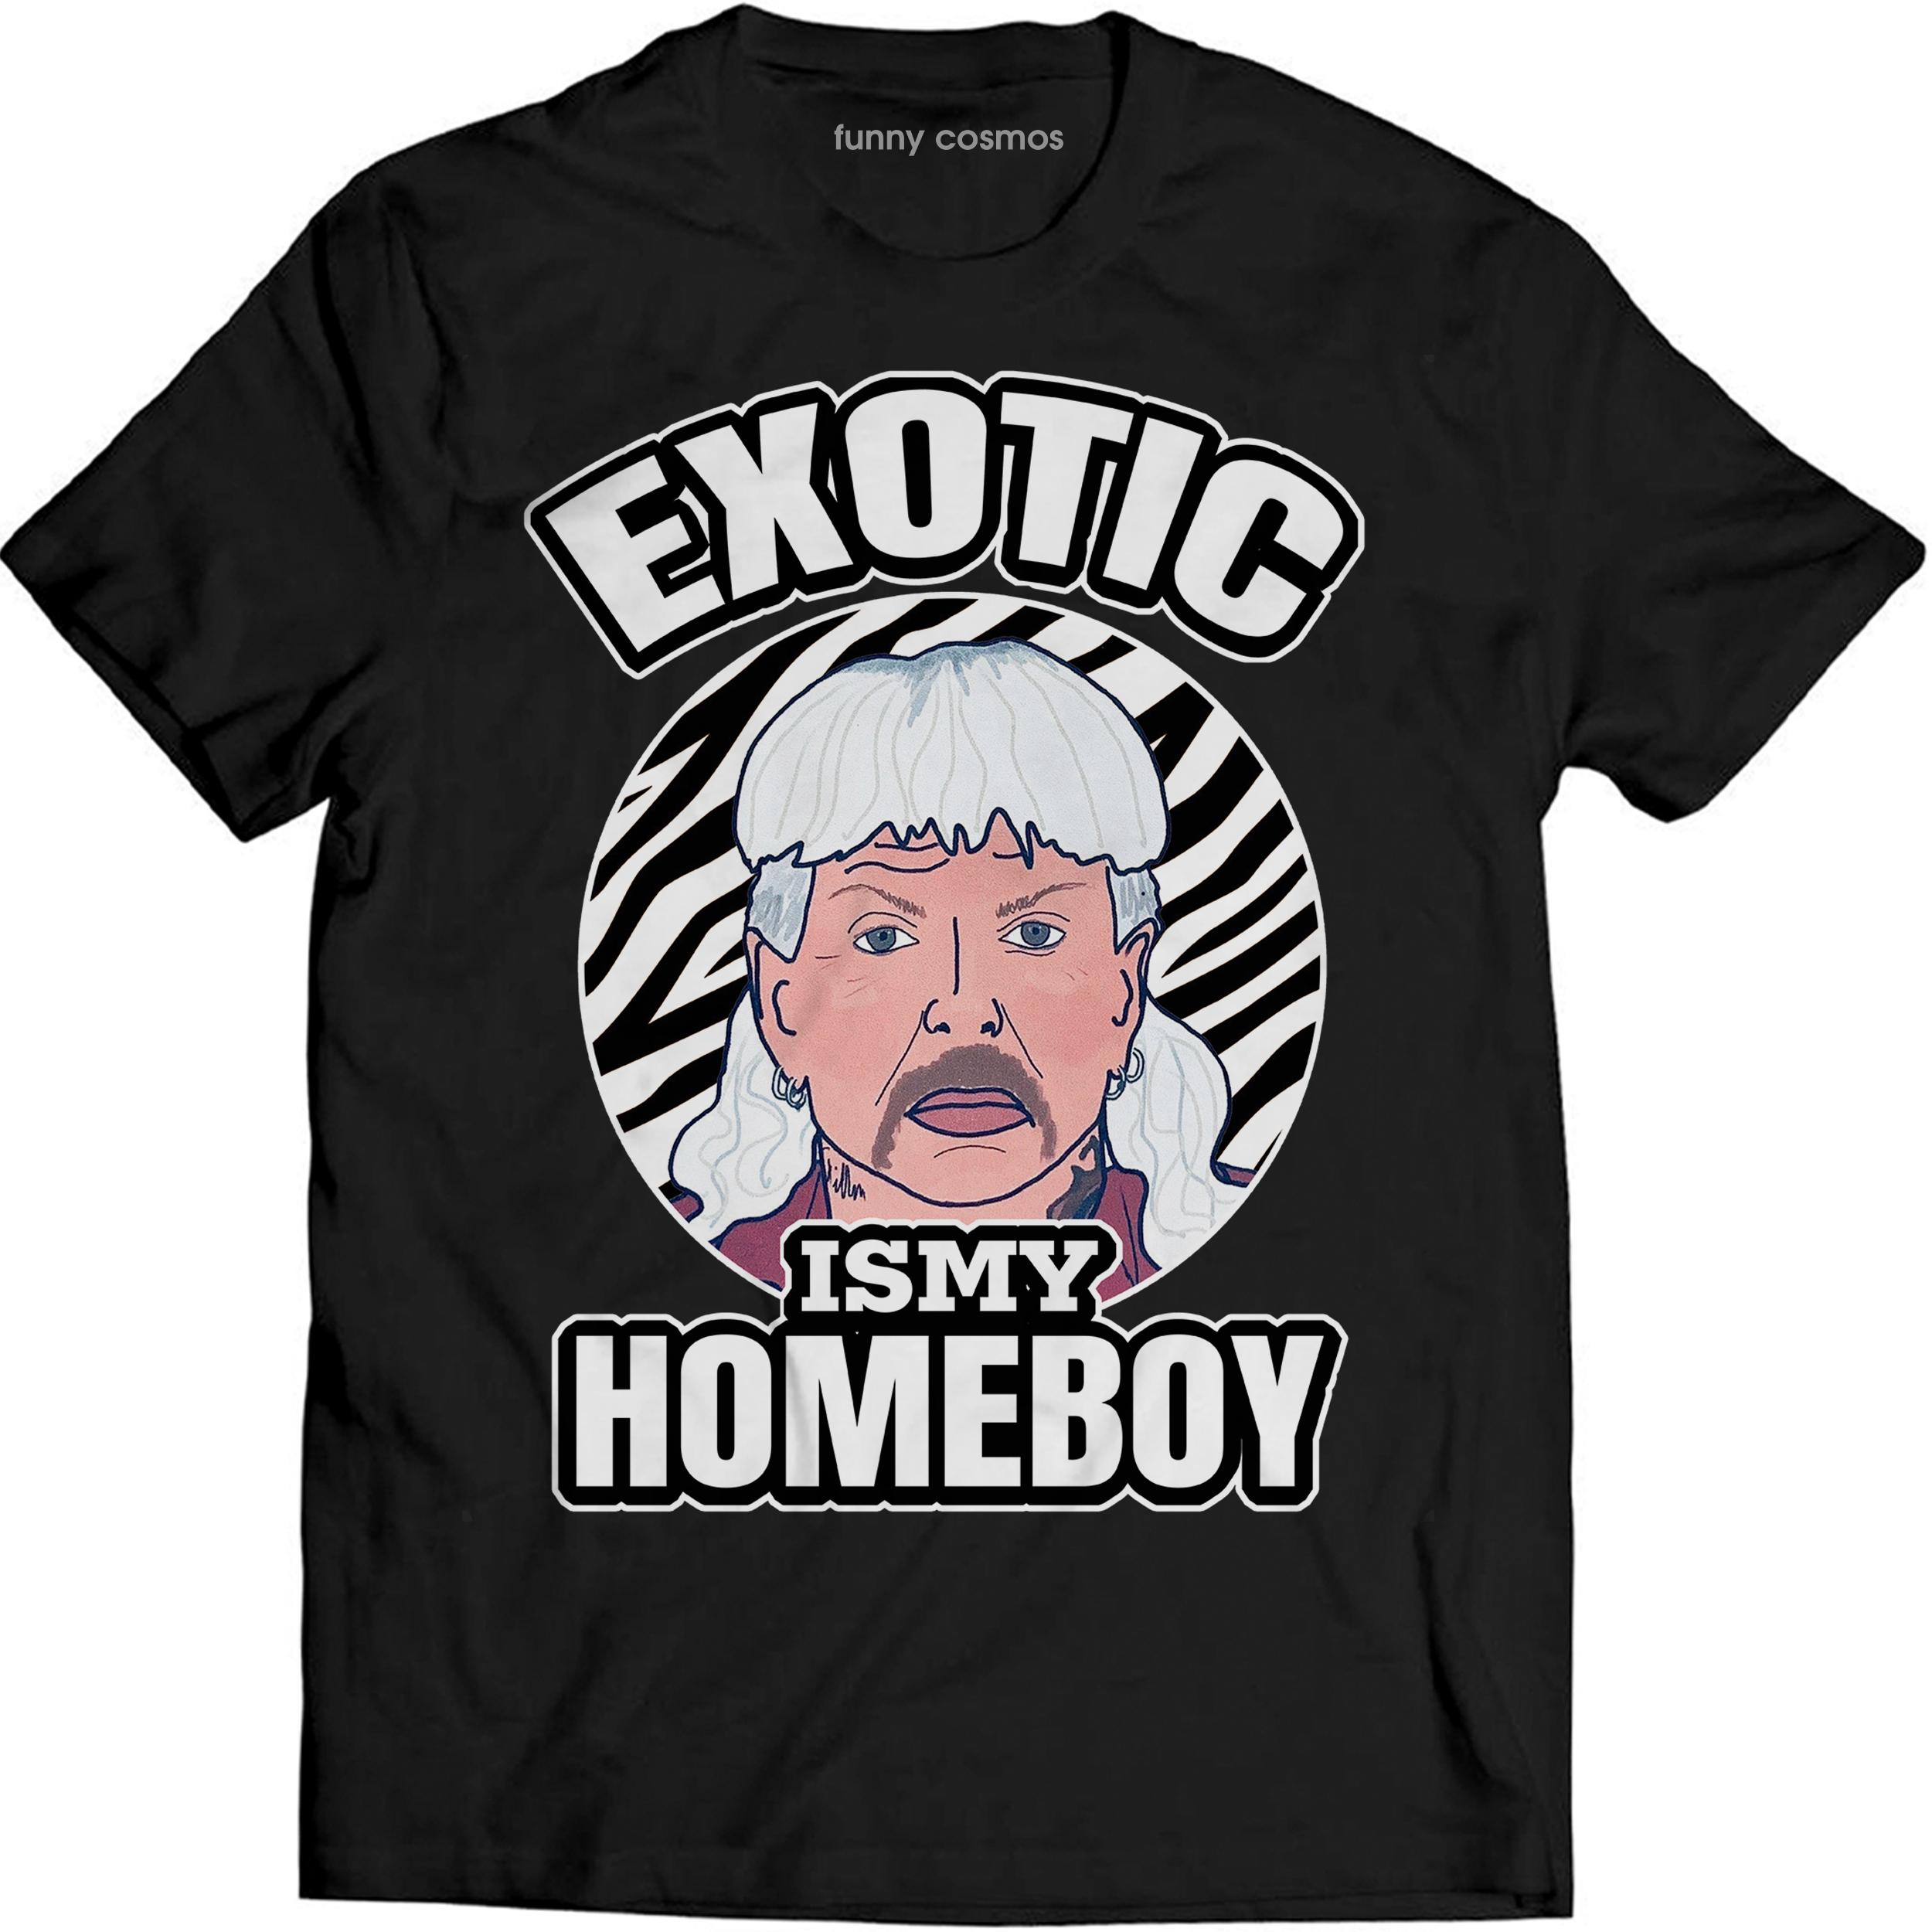 Exotic Is My Homeboy Funny T Shirt Joe Lovers Exotic Tiger King T Shirt